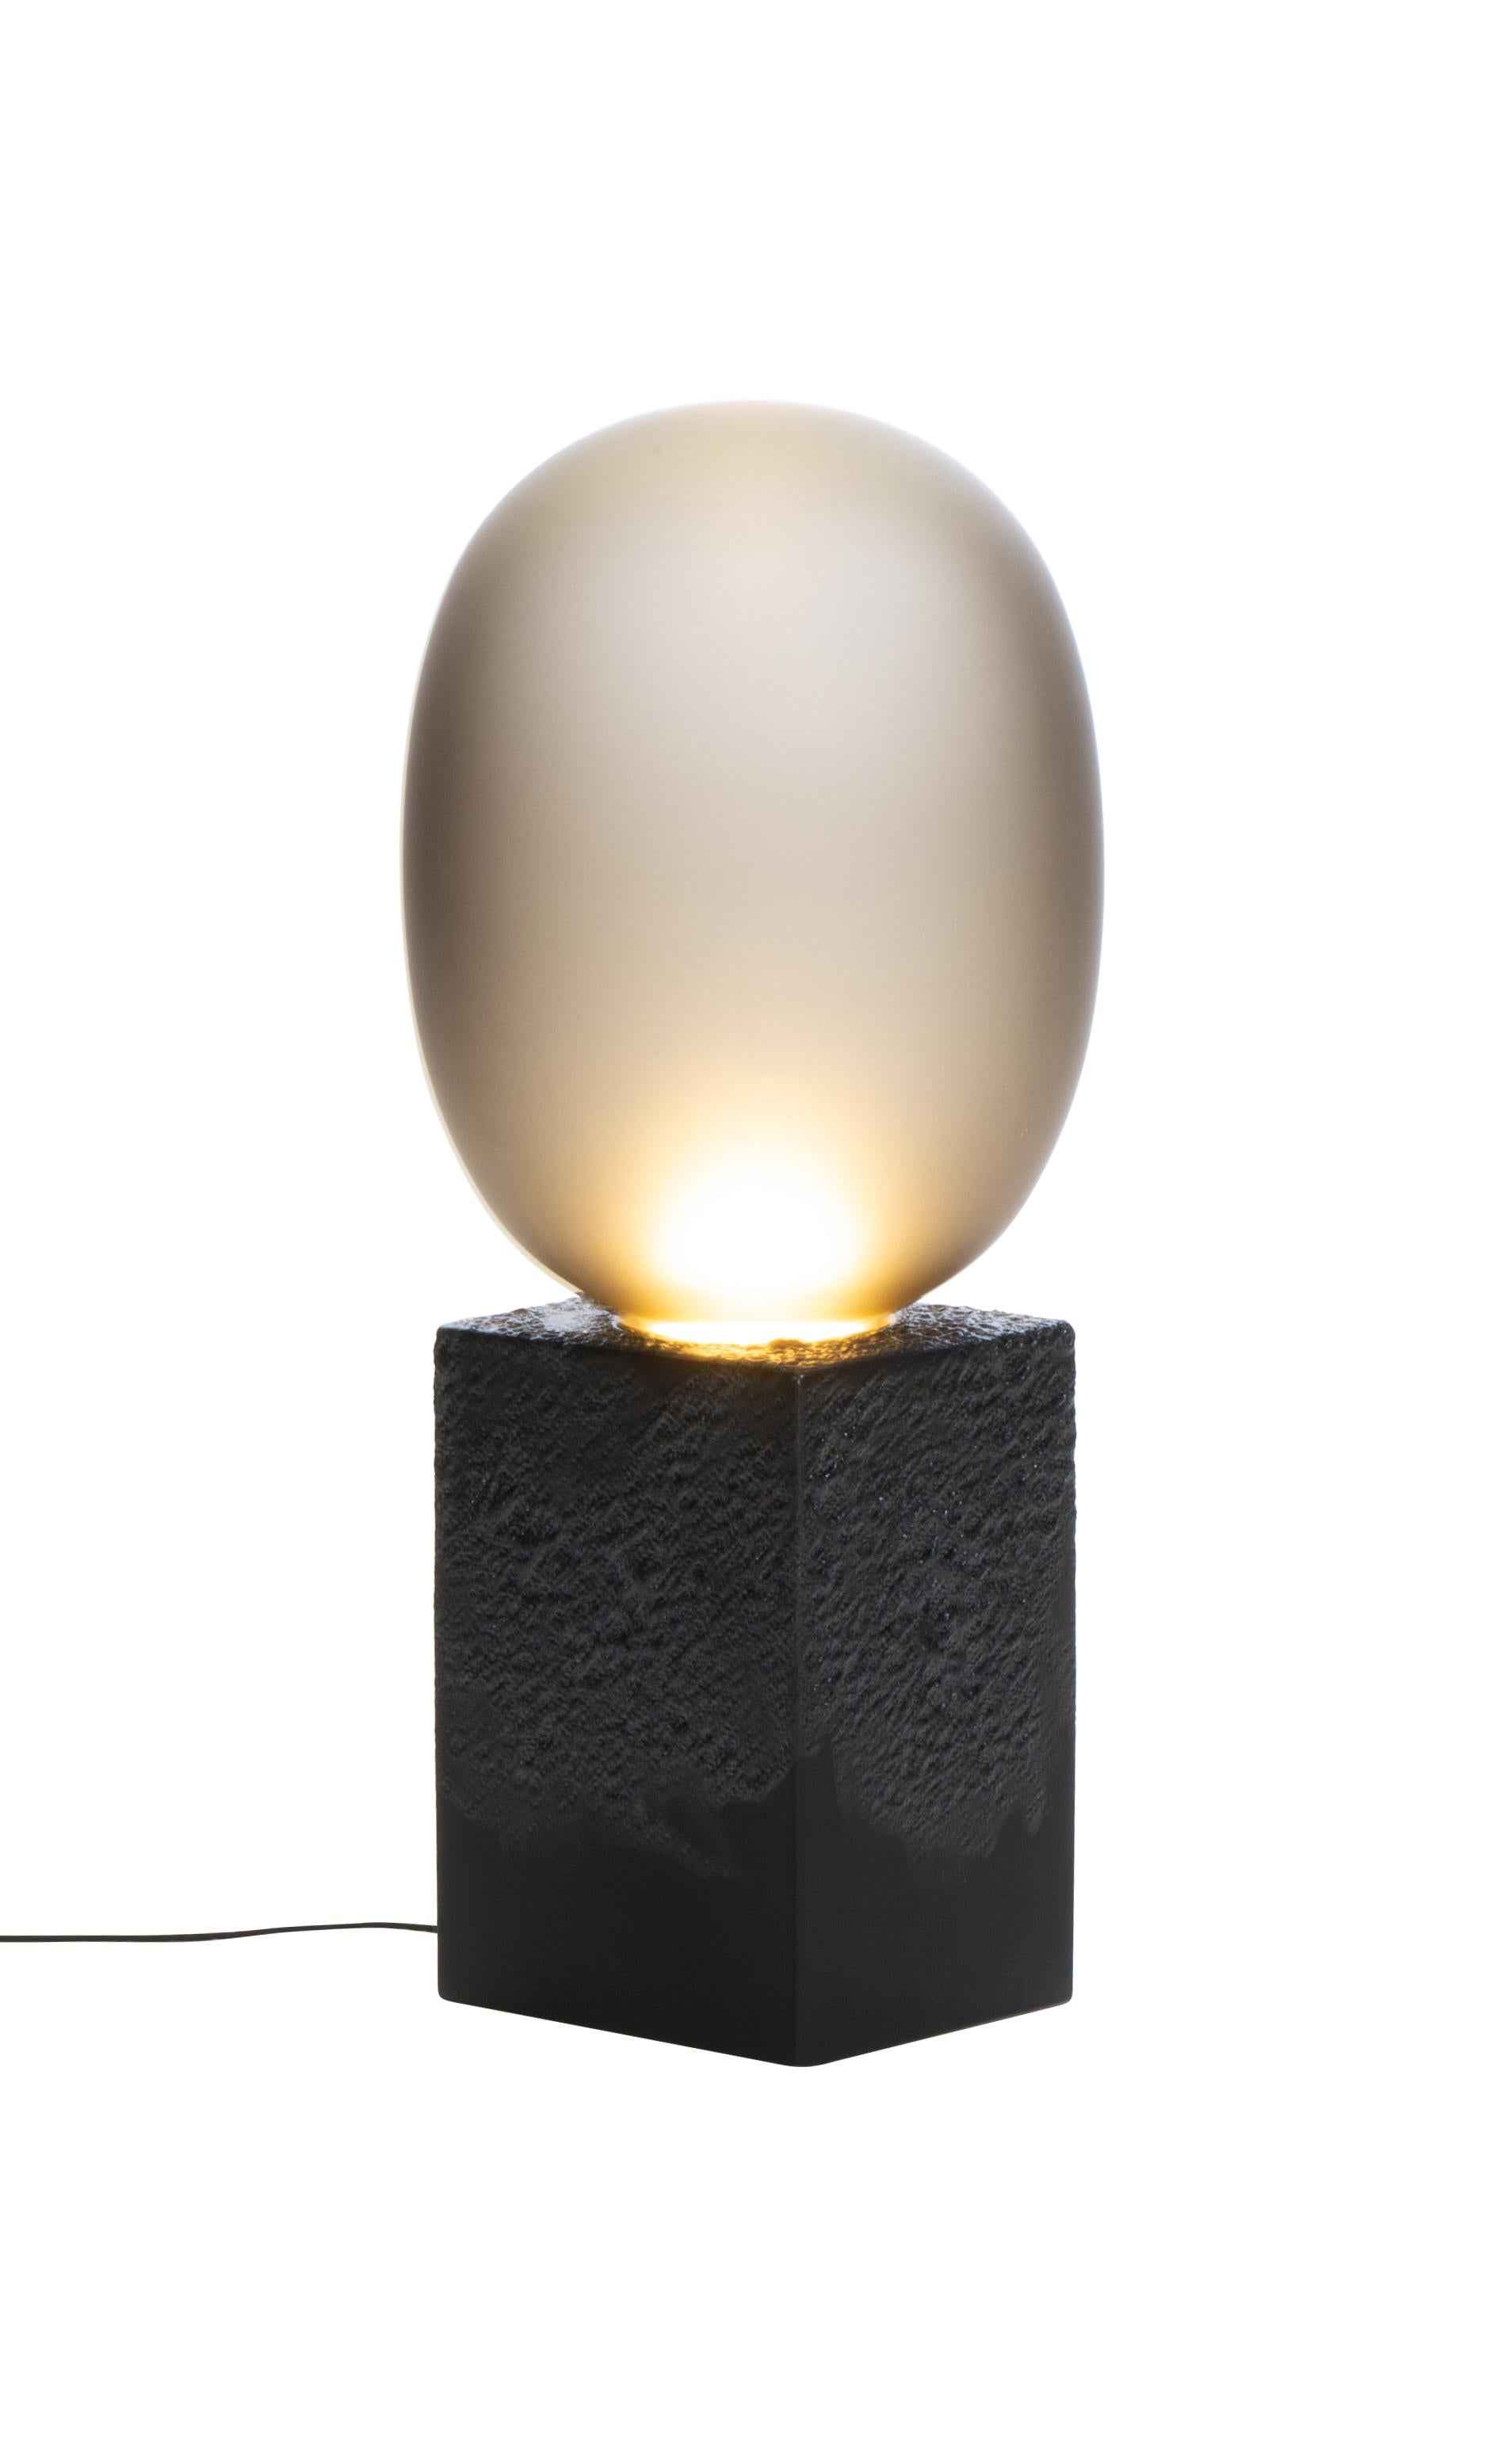 Magma One High Smoky Grey Acetato Black Table Lamp by Pulpo
Dimensions: D30 x W30 x H69 cm
Materials: Ceramic, handblown glass coloured, Textile

Also available in different finishes: smoky grey acetato black ,white acetato, black smoky grey